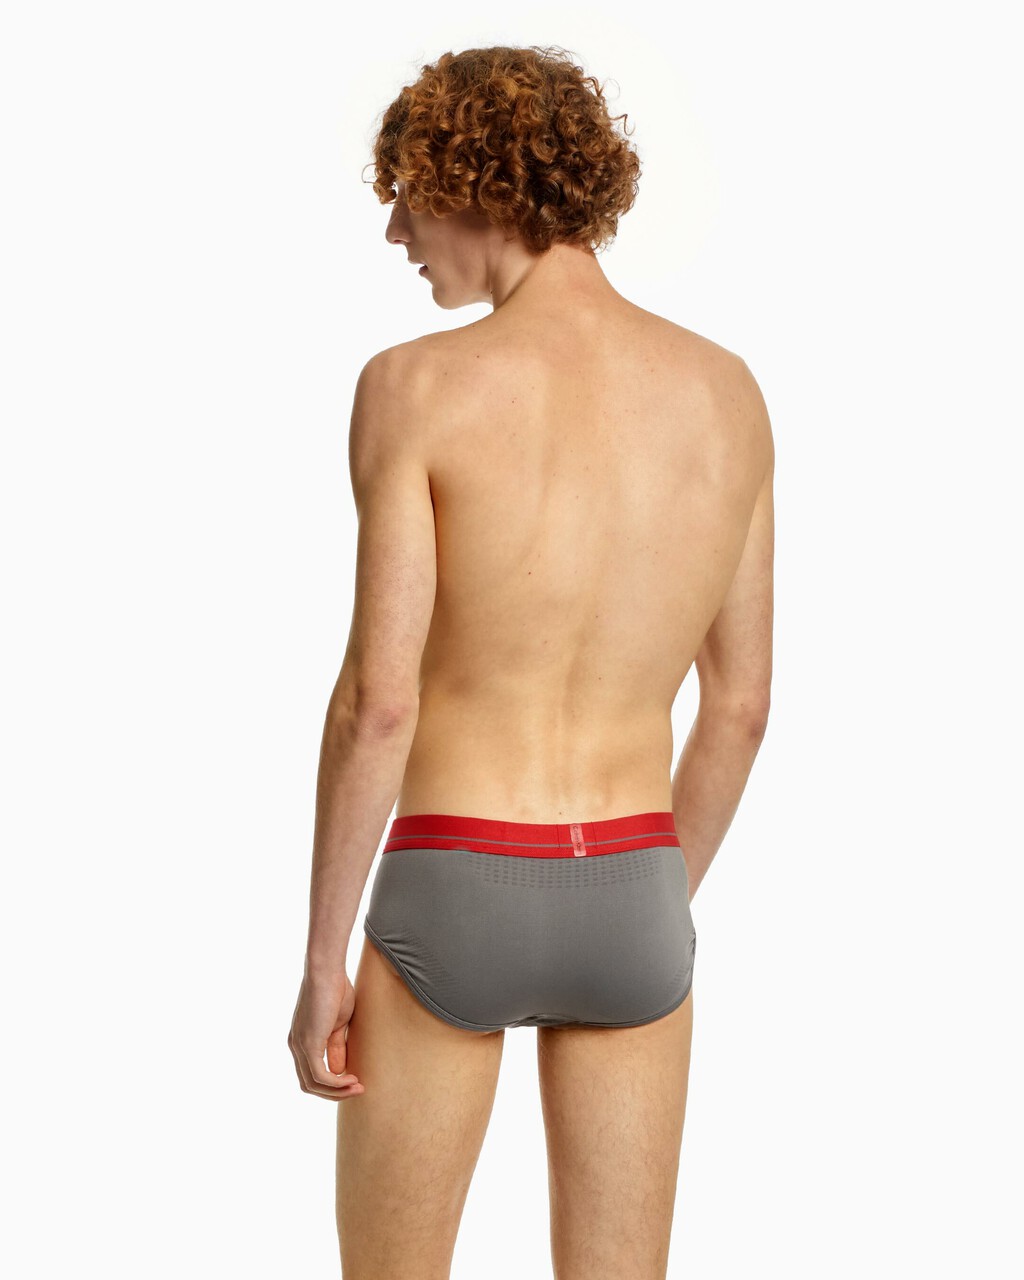 PRO FIT MICRO HIPSTER BRIEF, Grey Sky, hi-res